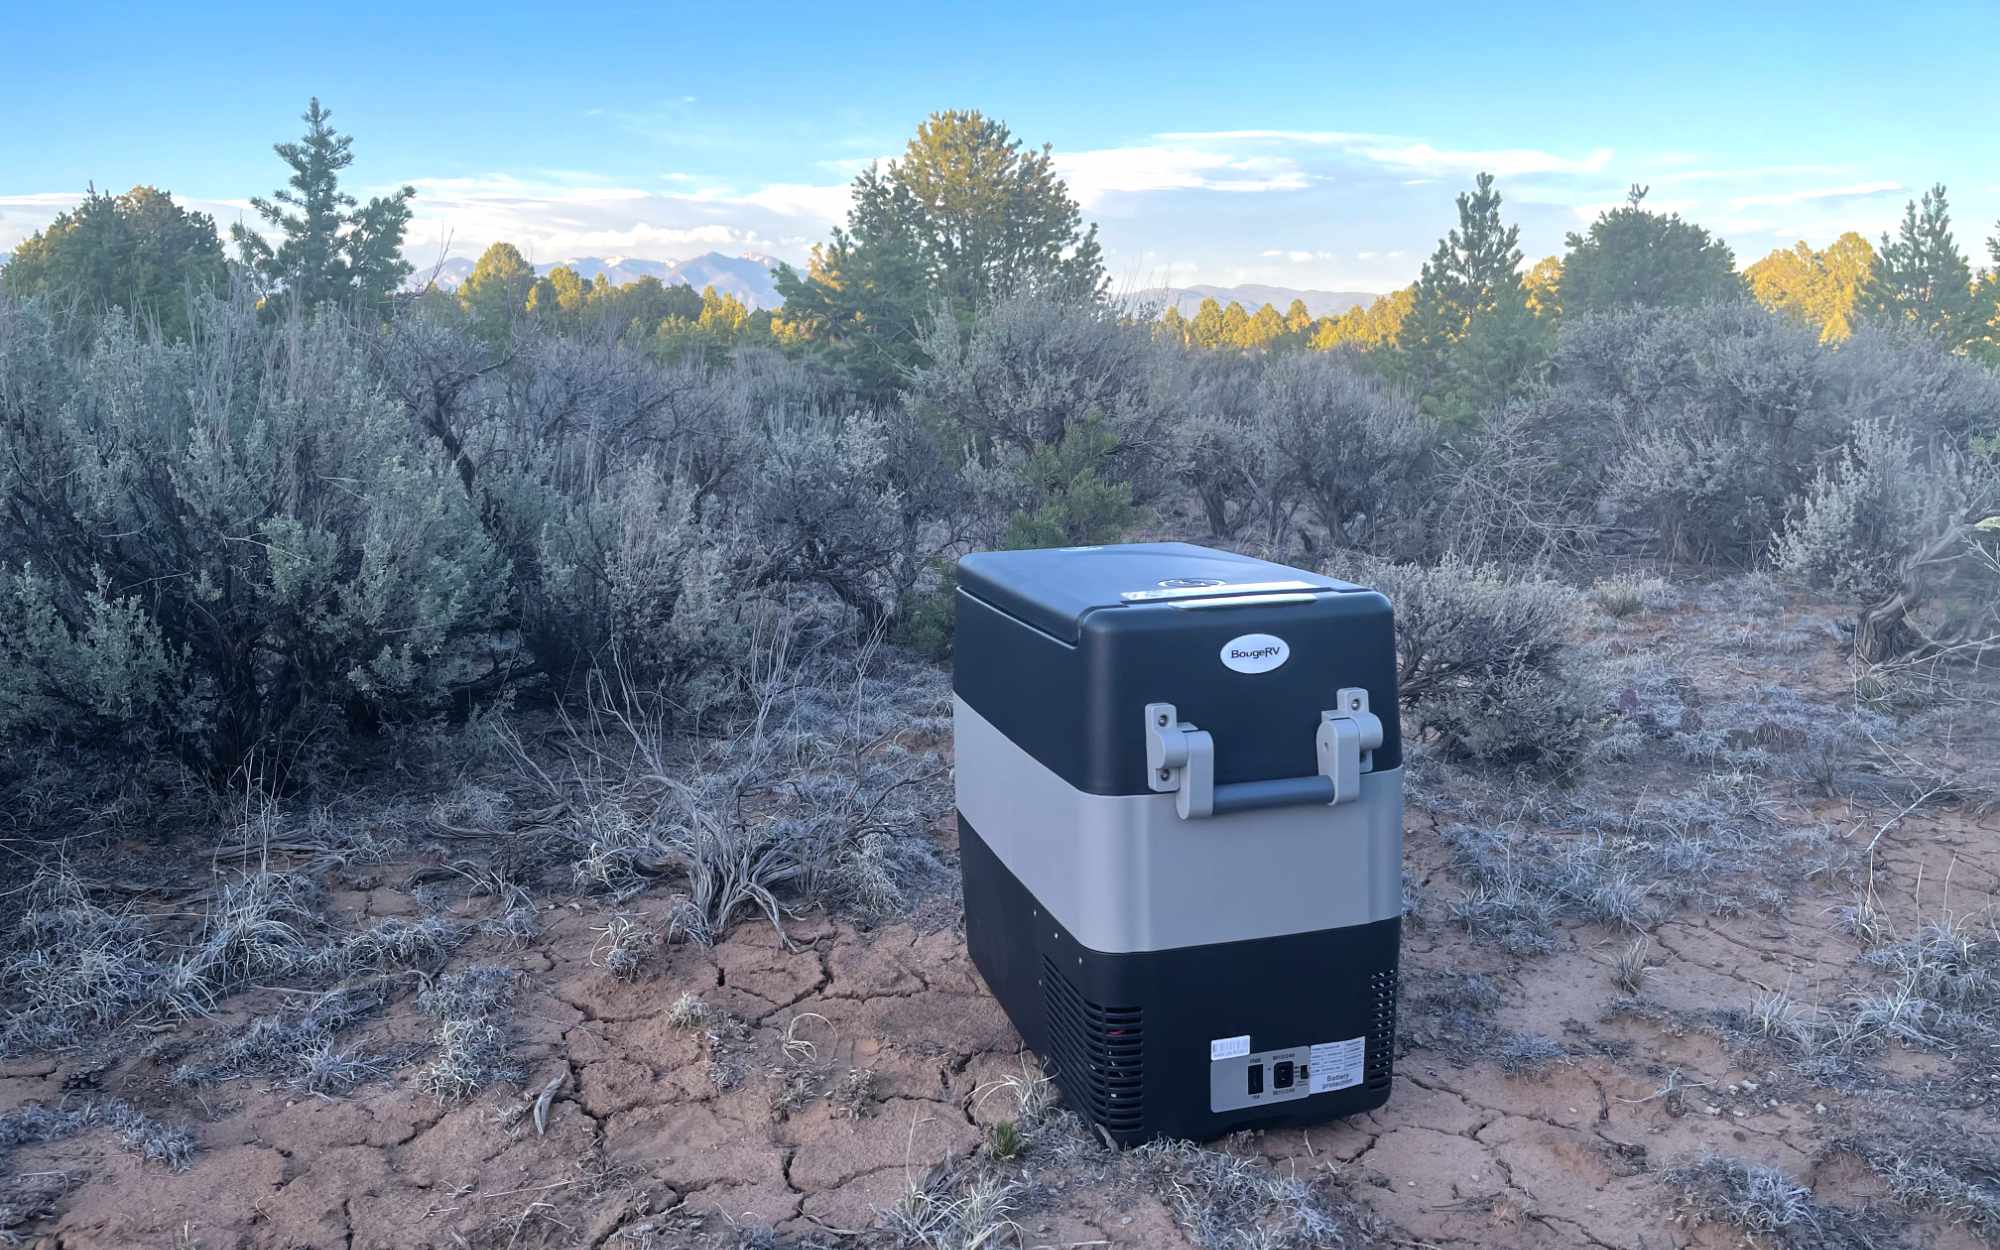 BougeRV Portable Fridge Review: Is This Cheap Vanlife Fridge Worth It?